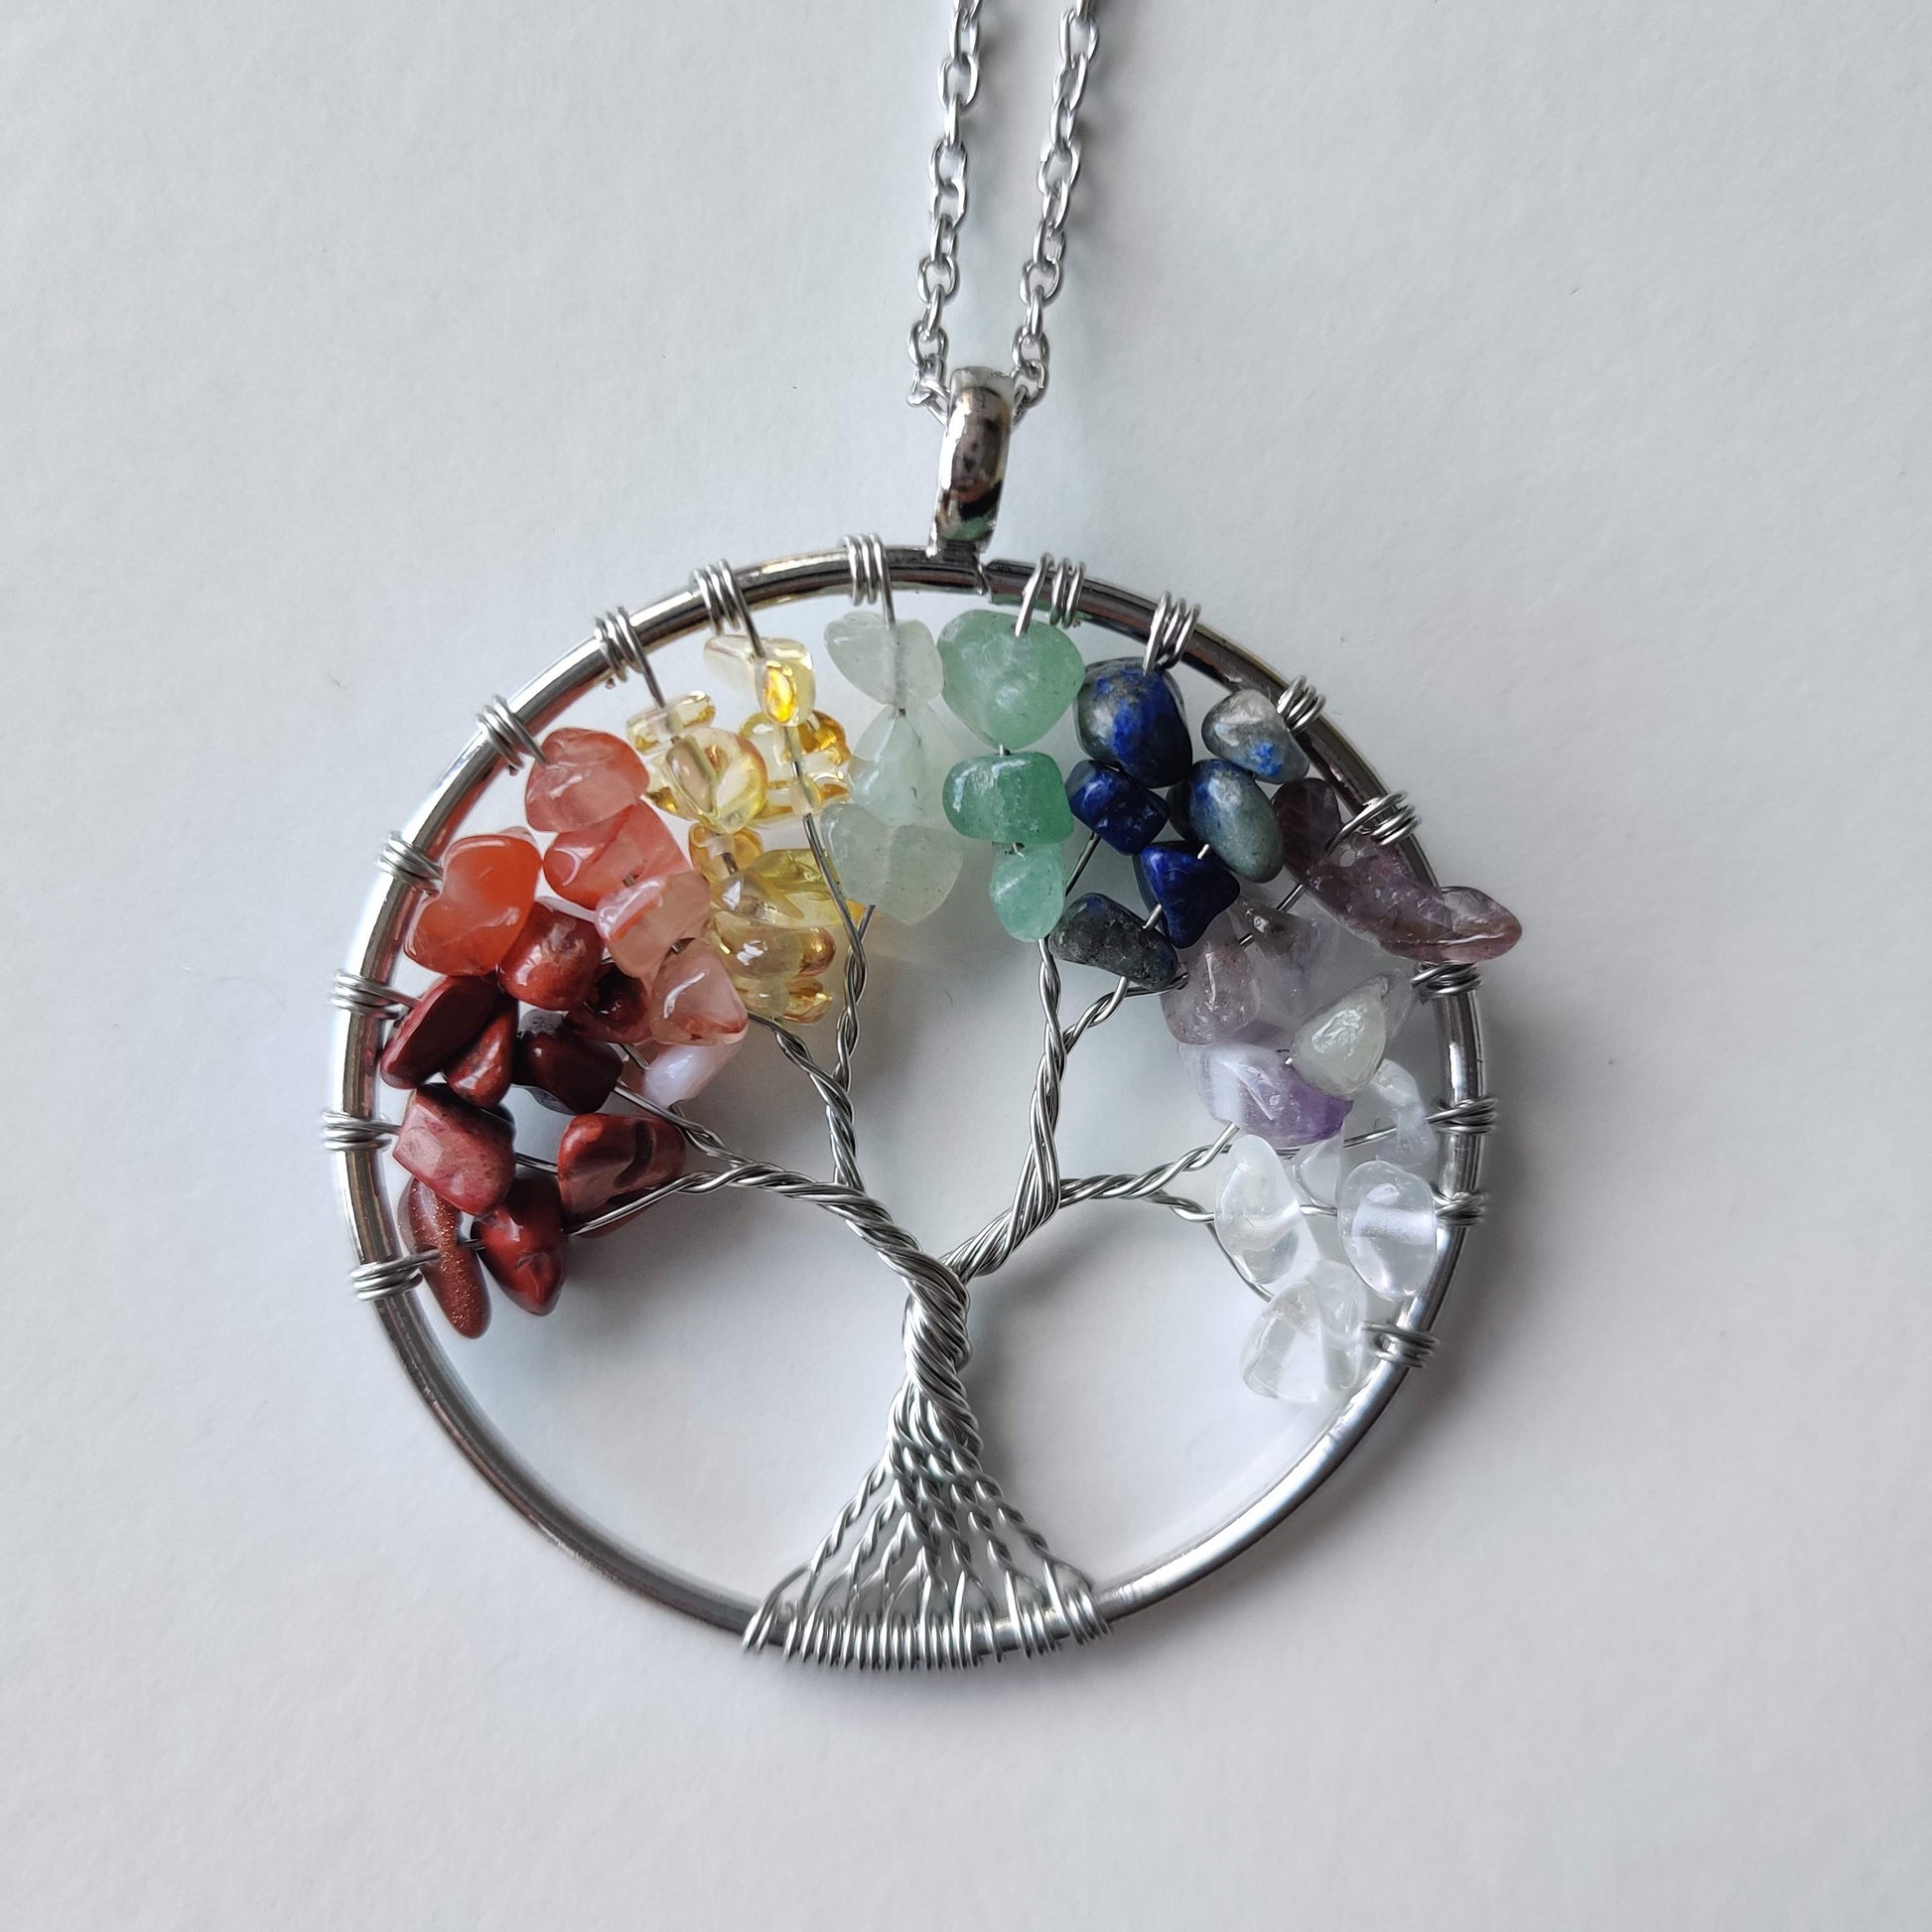 Chakra Tree of Life Pendant with Silver Chain - Rivendell Shop